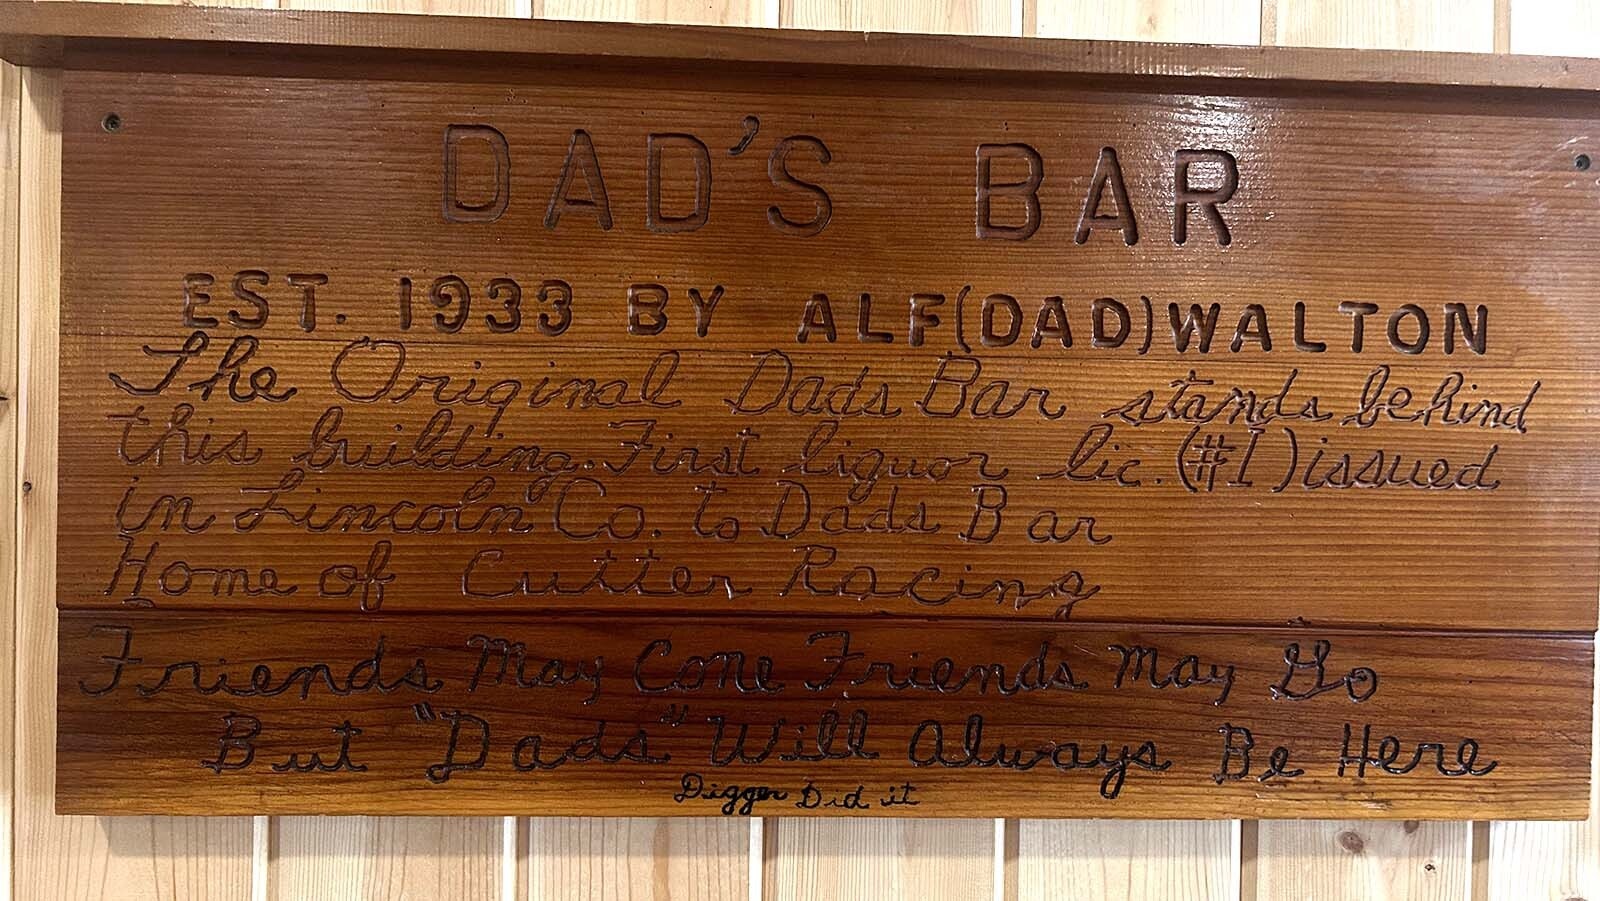 A tribute to the founder of Dad’s Bar, Alf “Dad” Walton hangs on the wall across from the bar.